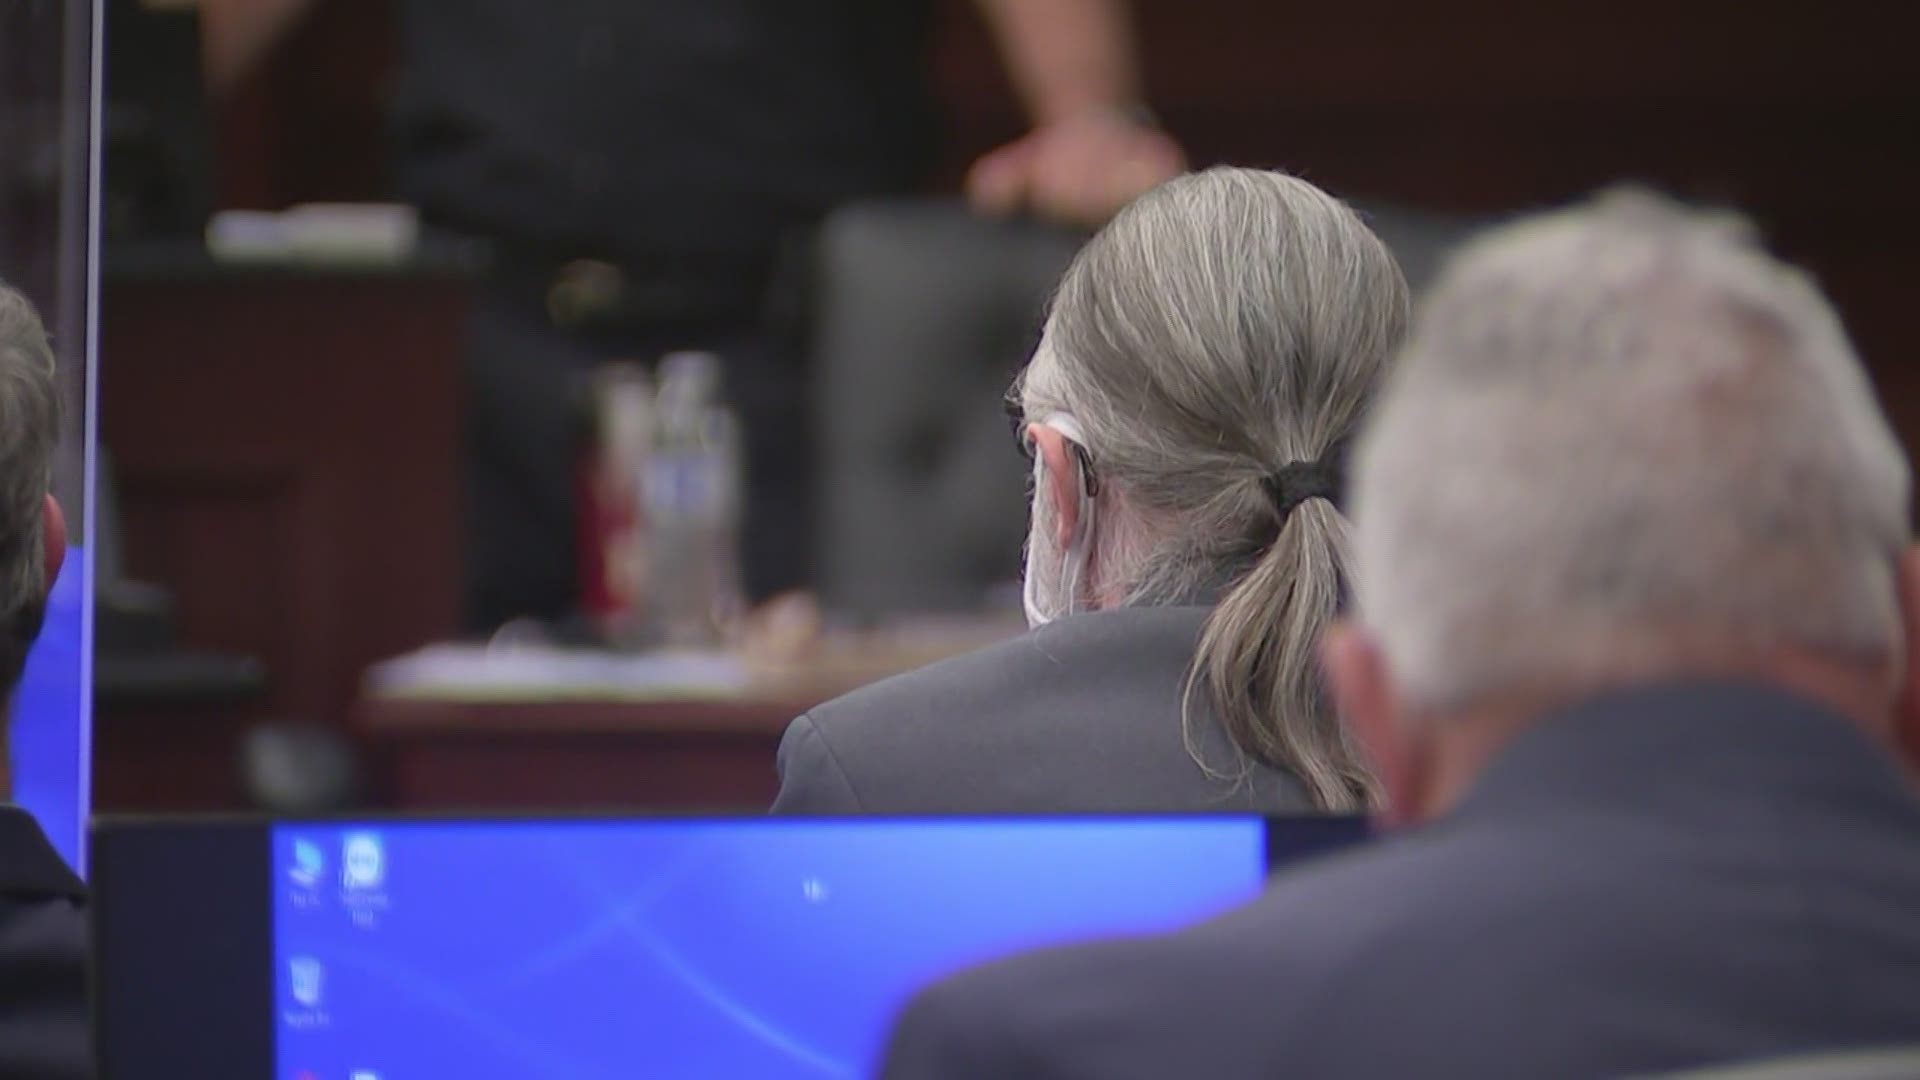 Russell Tillis found guilty in Jacksonville 'House of Horrors' murder trial